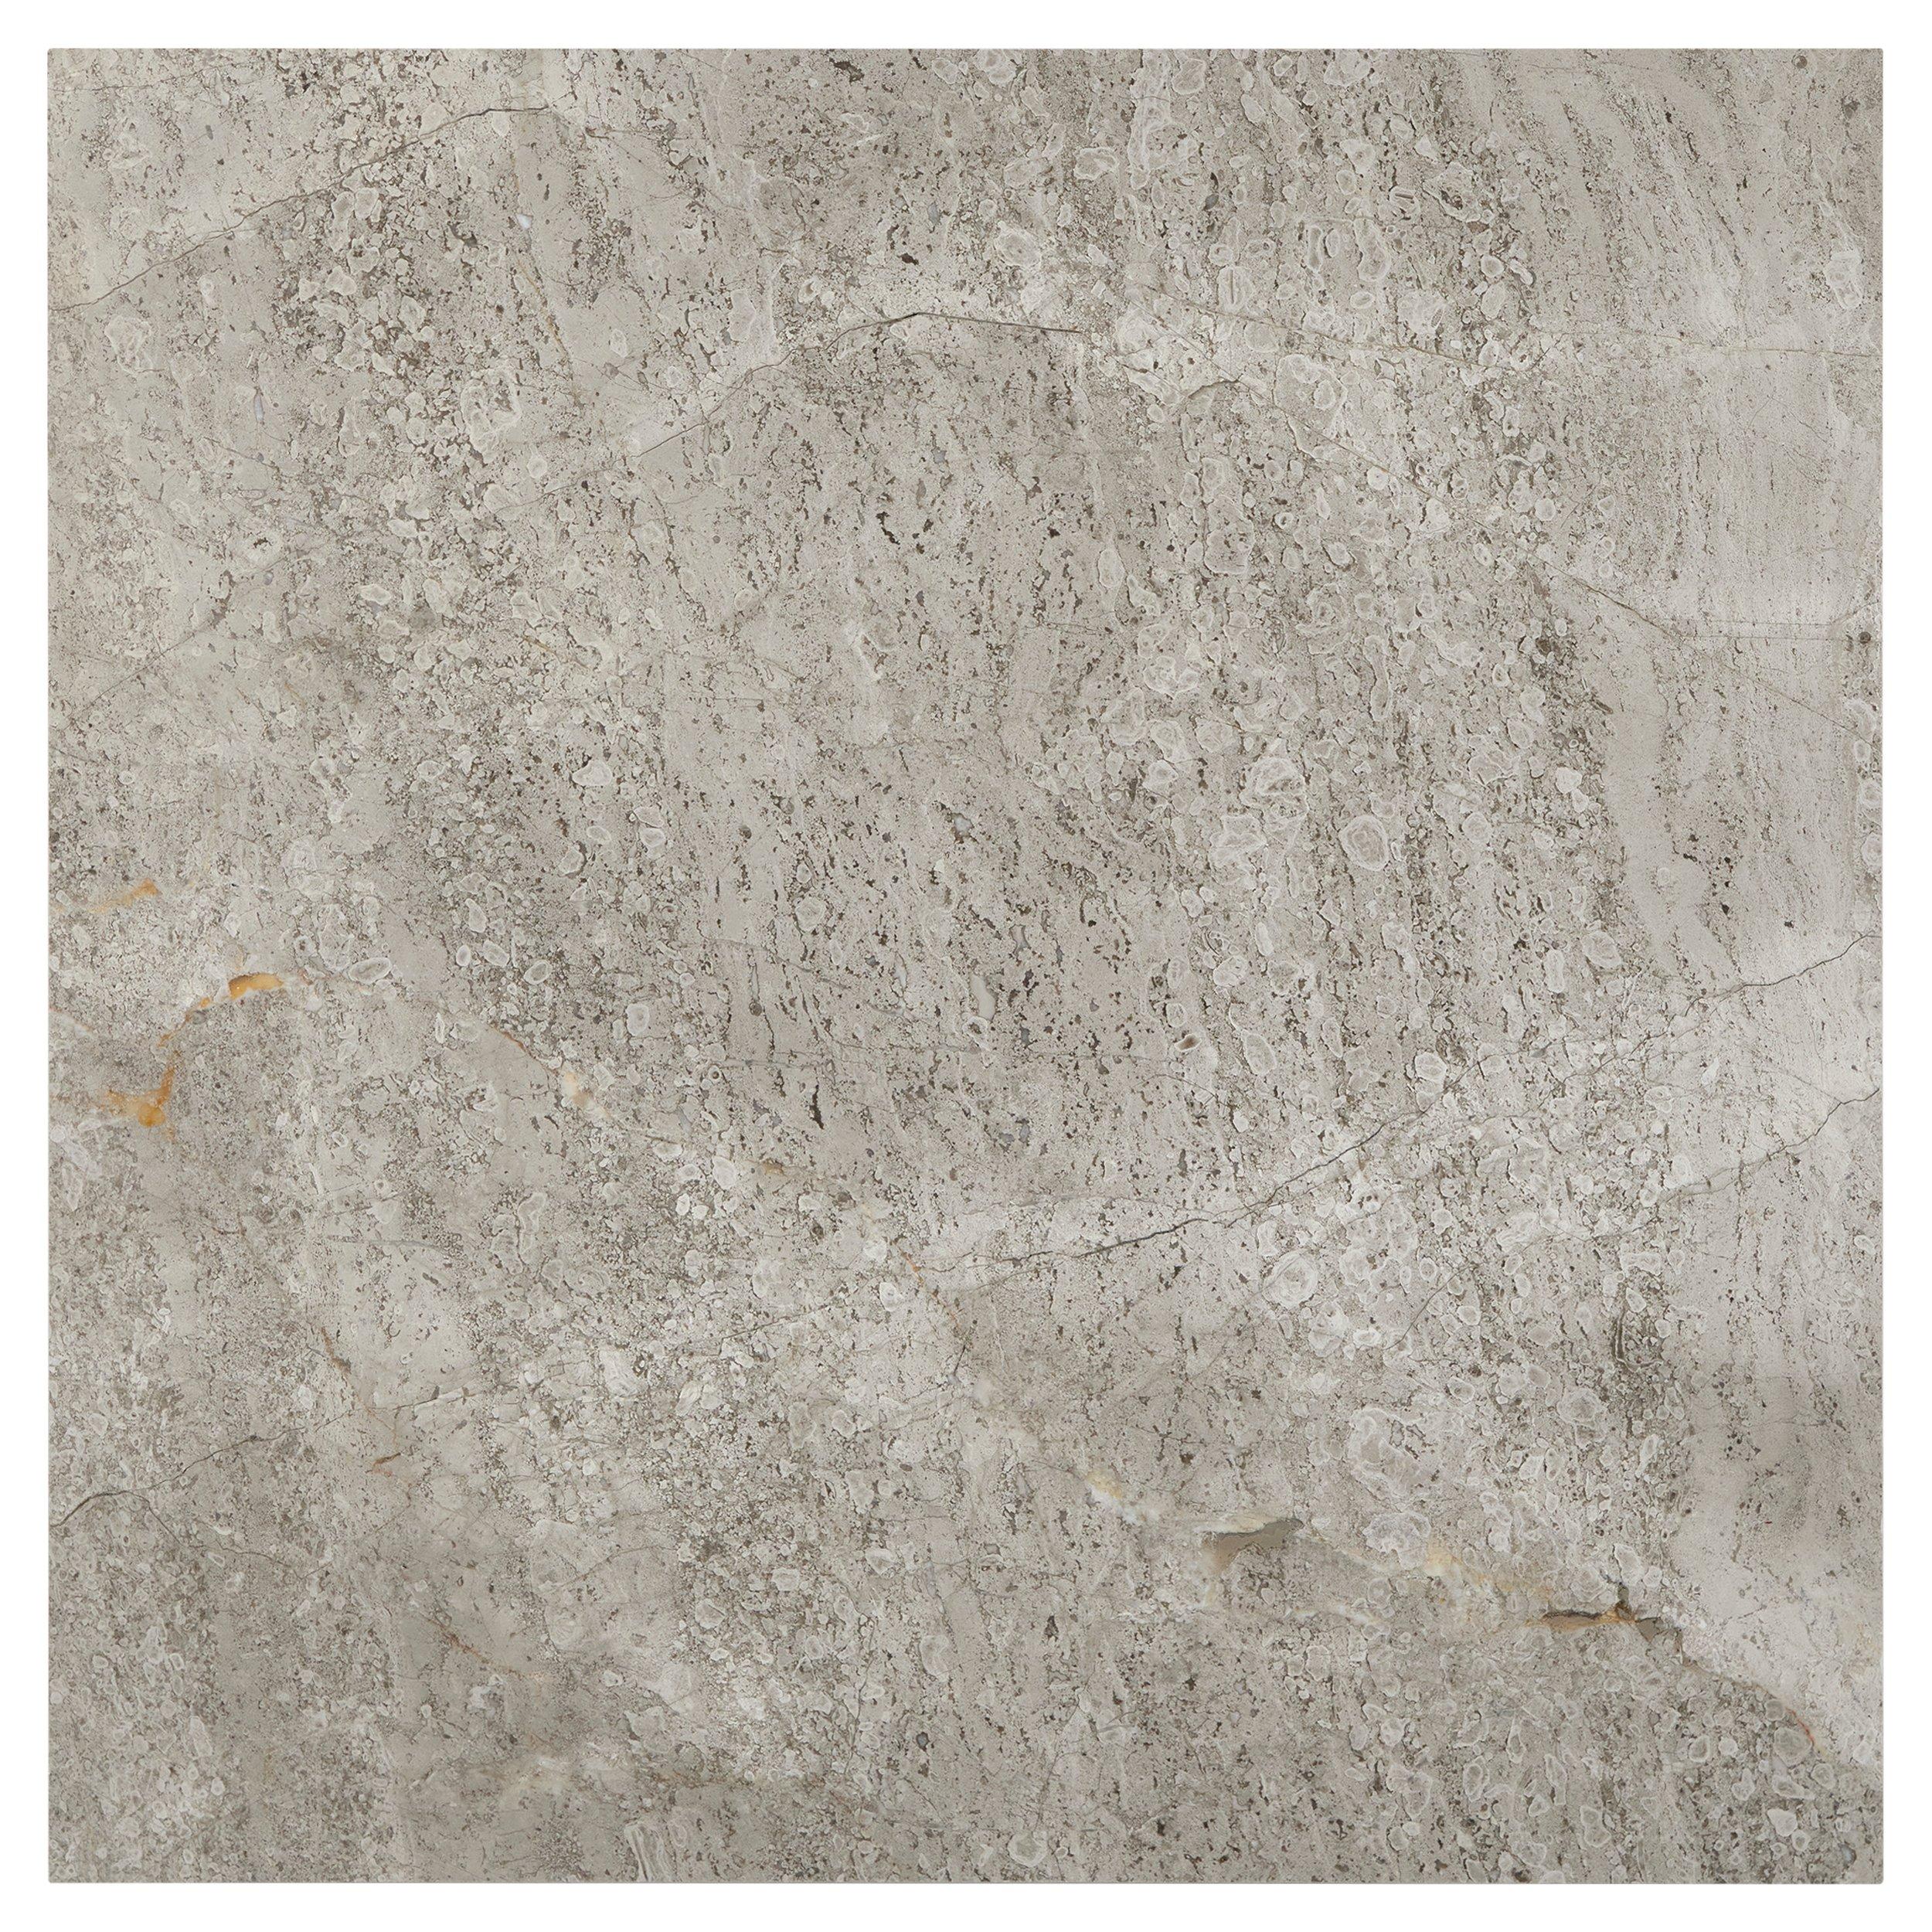 Ristretto Polished Marble Tile